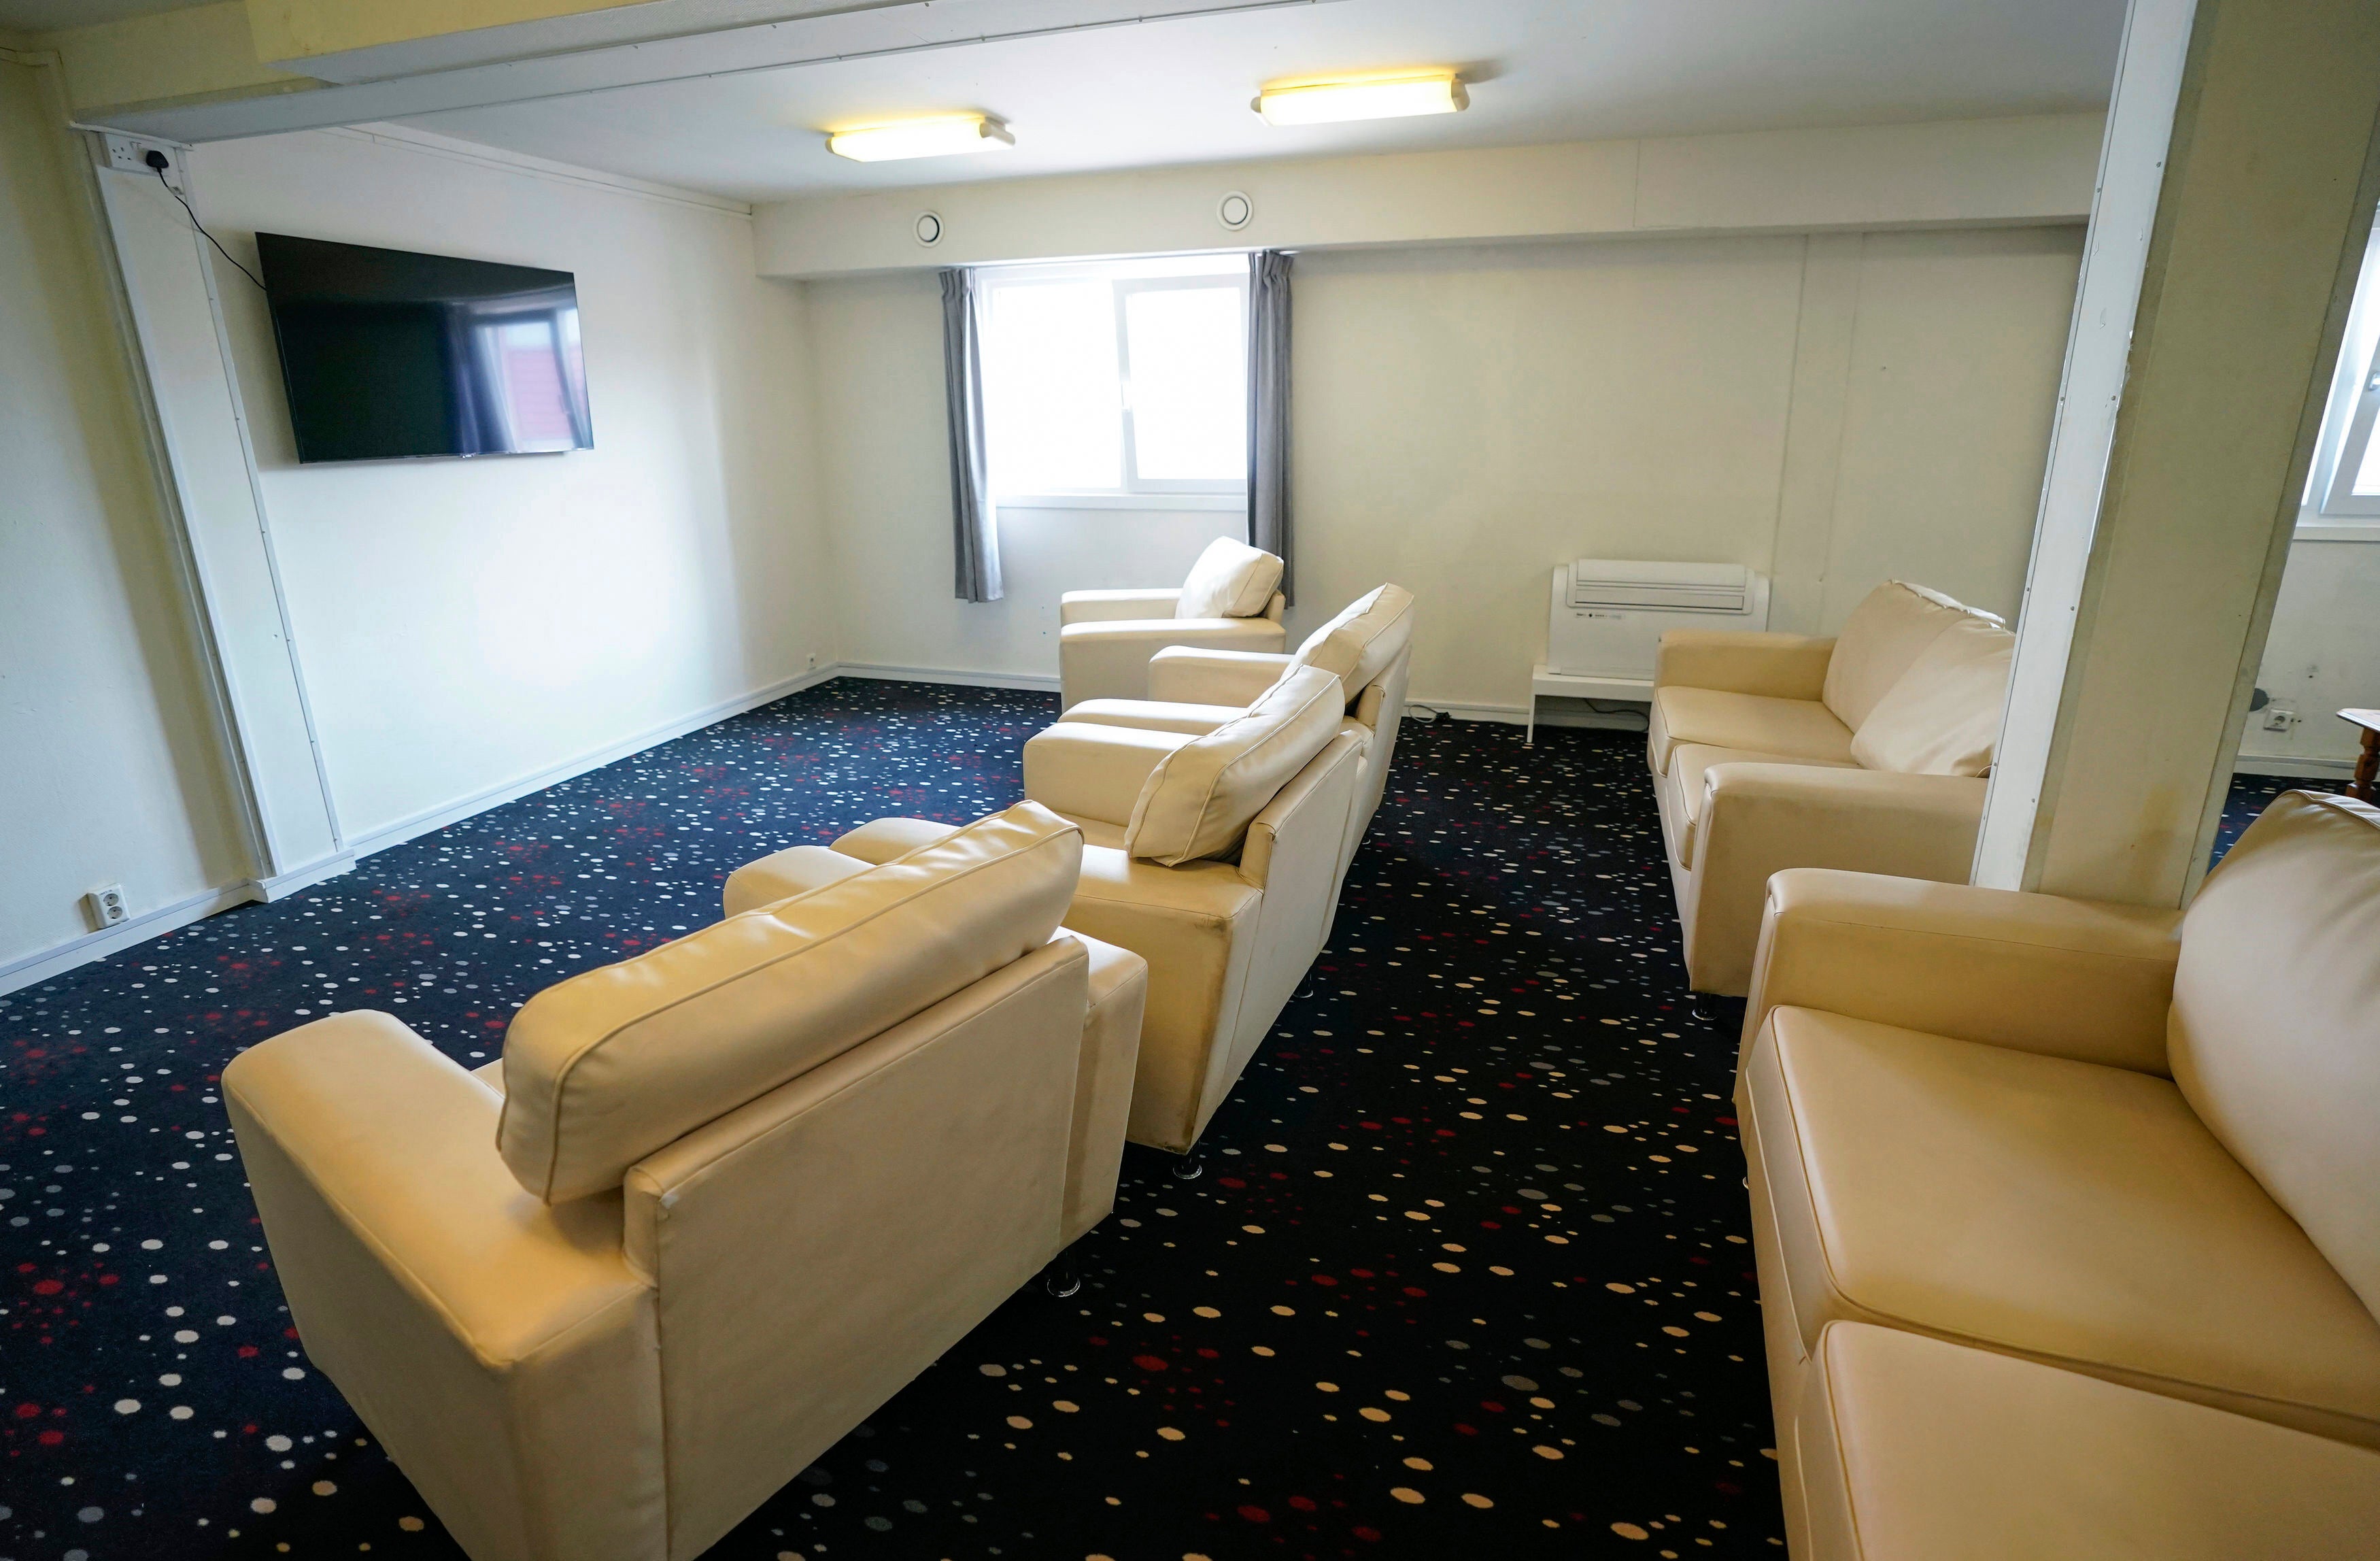 A room for residents to watch television onboard the Bibby Stockholm accommodation barge